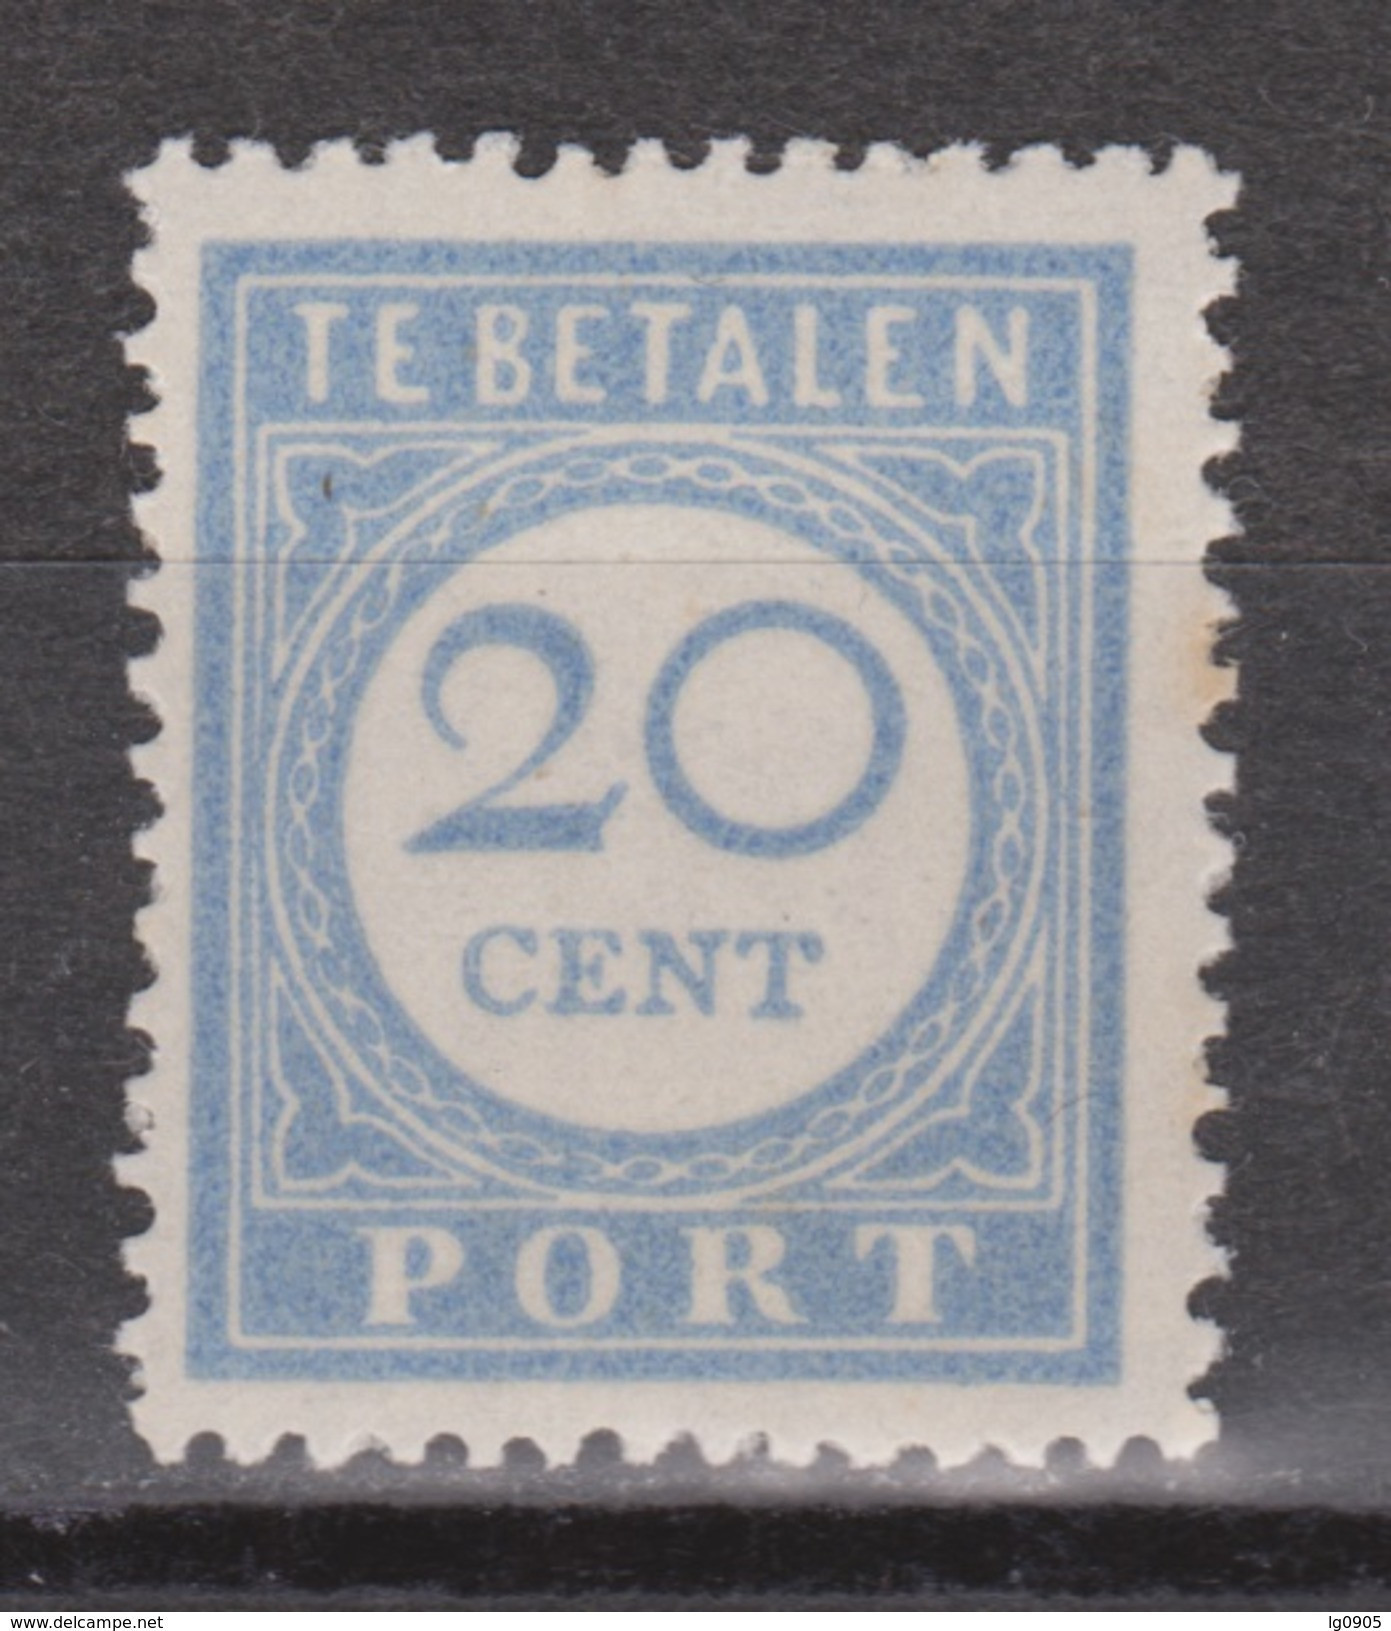 NVPH Nederland Netherlands Holanda Pays Bas Port 58 MLH Timbre-taxe Postmarke Sellos De Correos NOW MANY DUE STAMPS - Impuestos